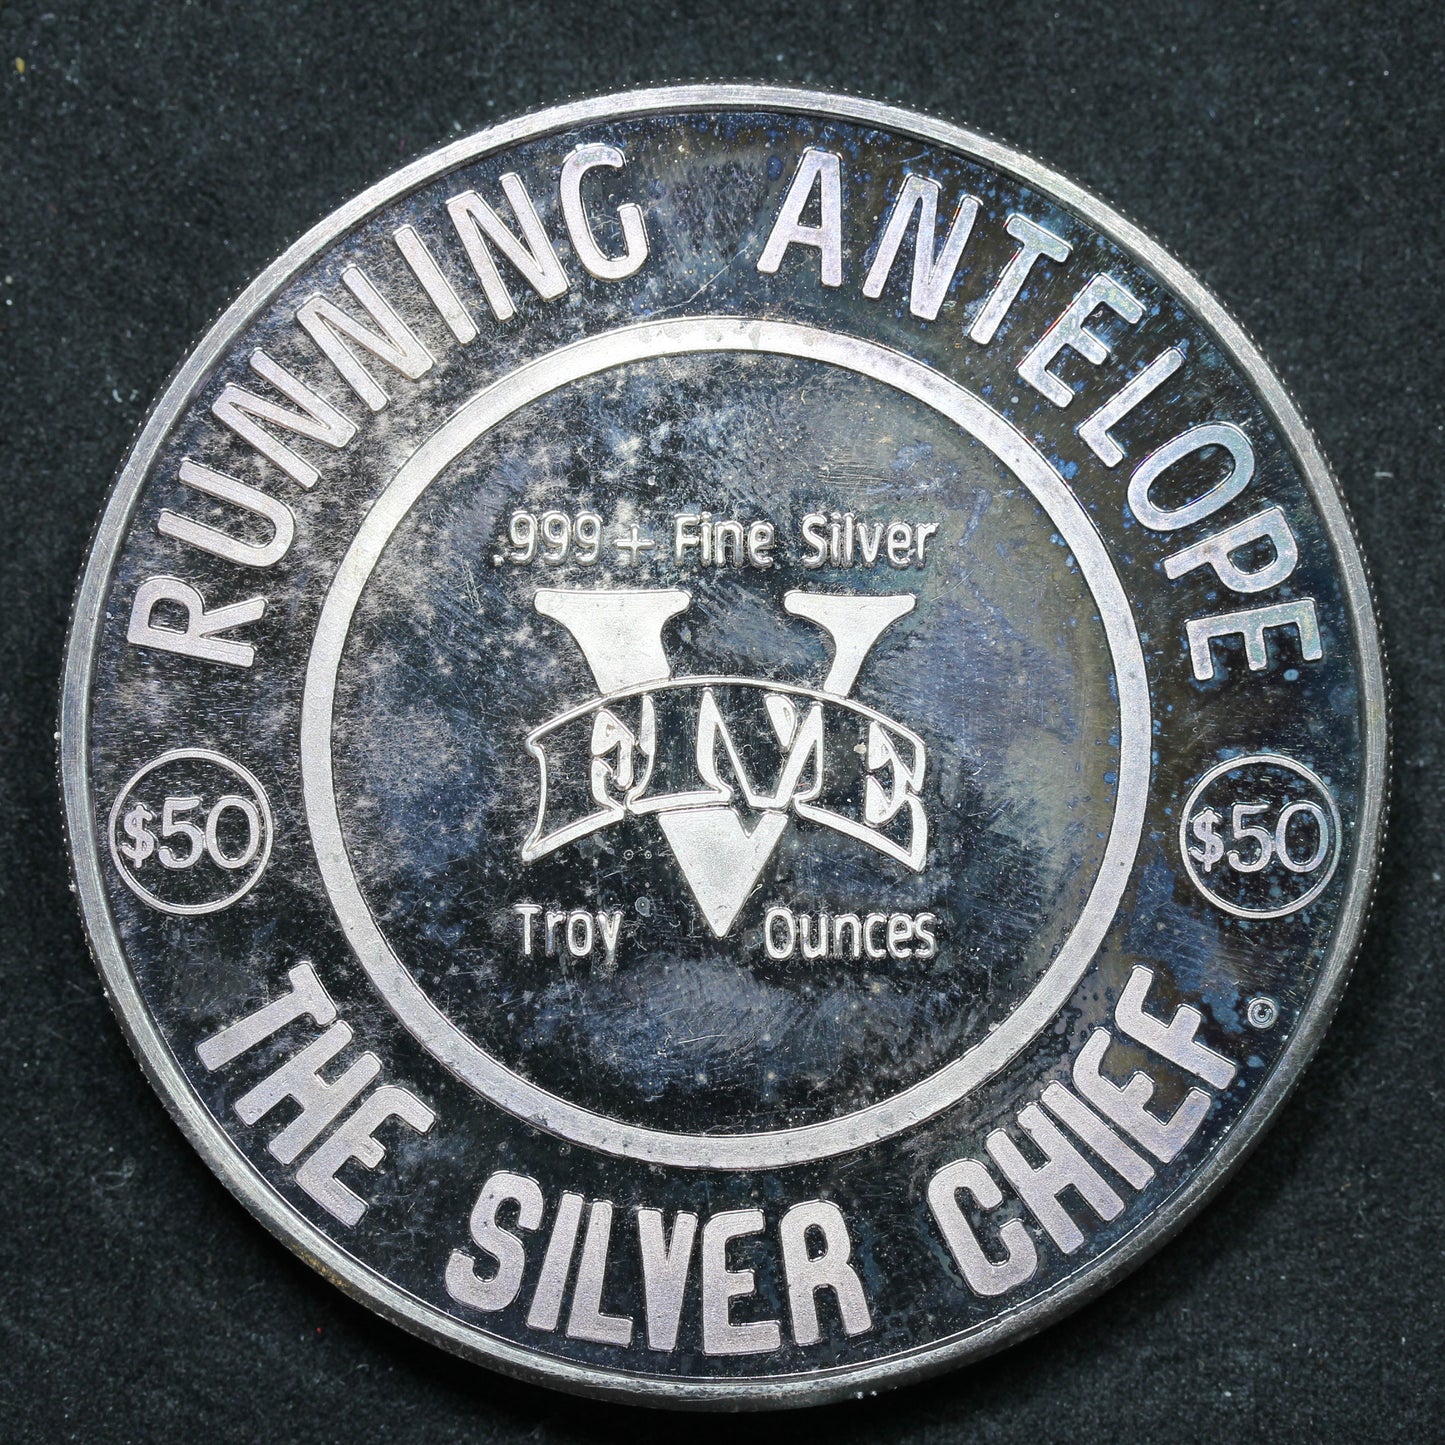 5 oz .999+ Fine Silver Art Round - Running Antelope The Silver Chief $50 - Toned